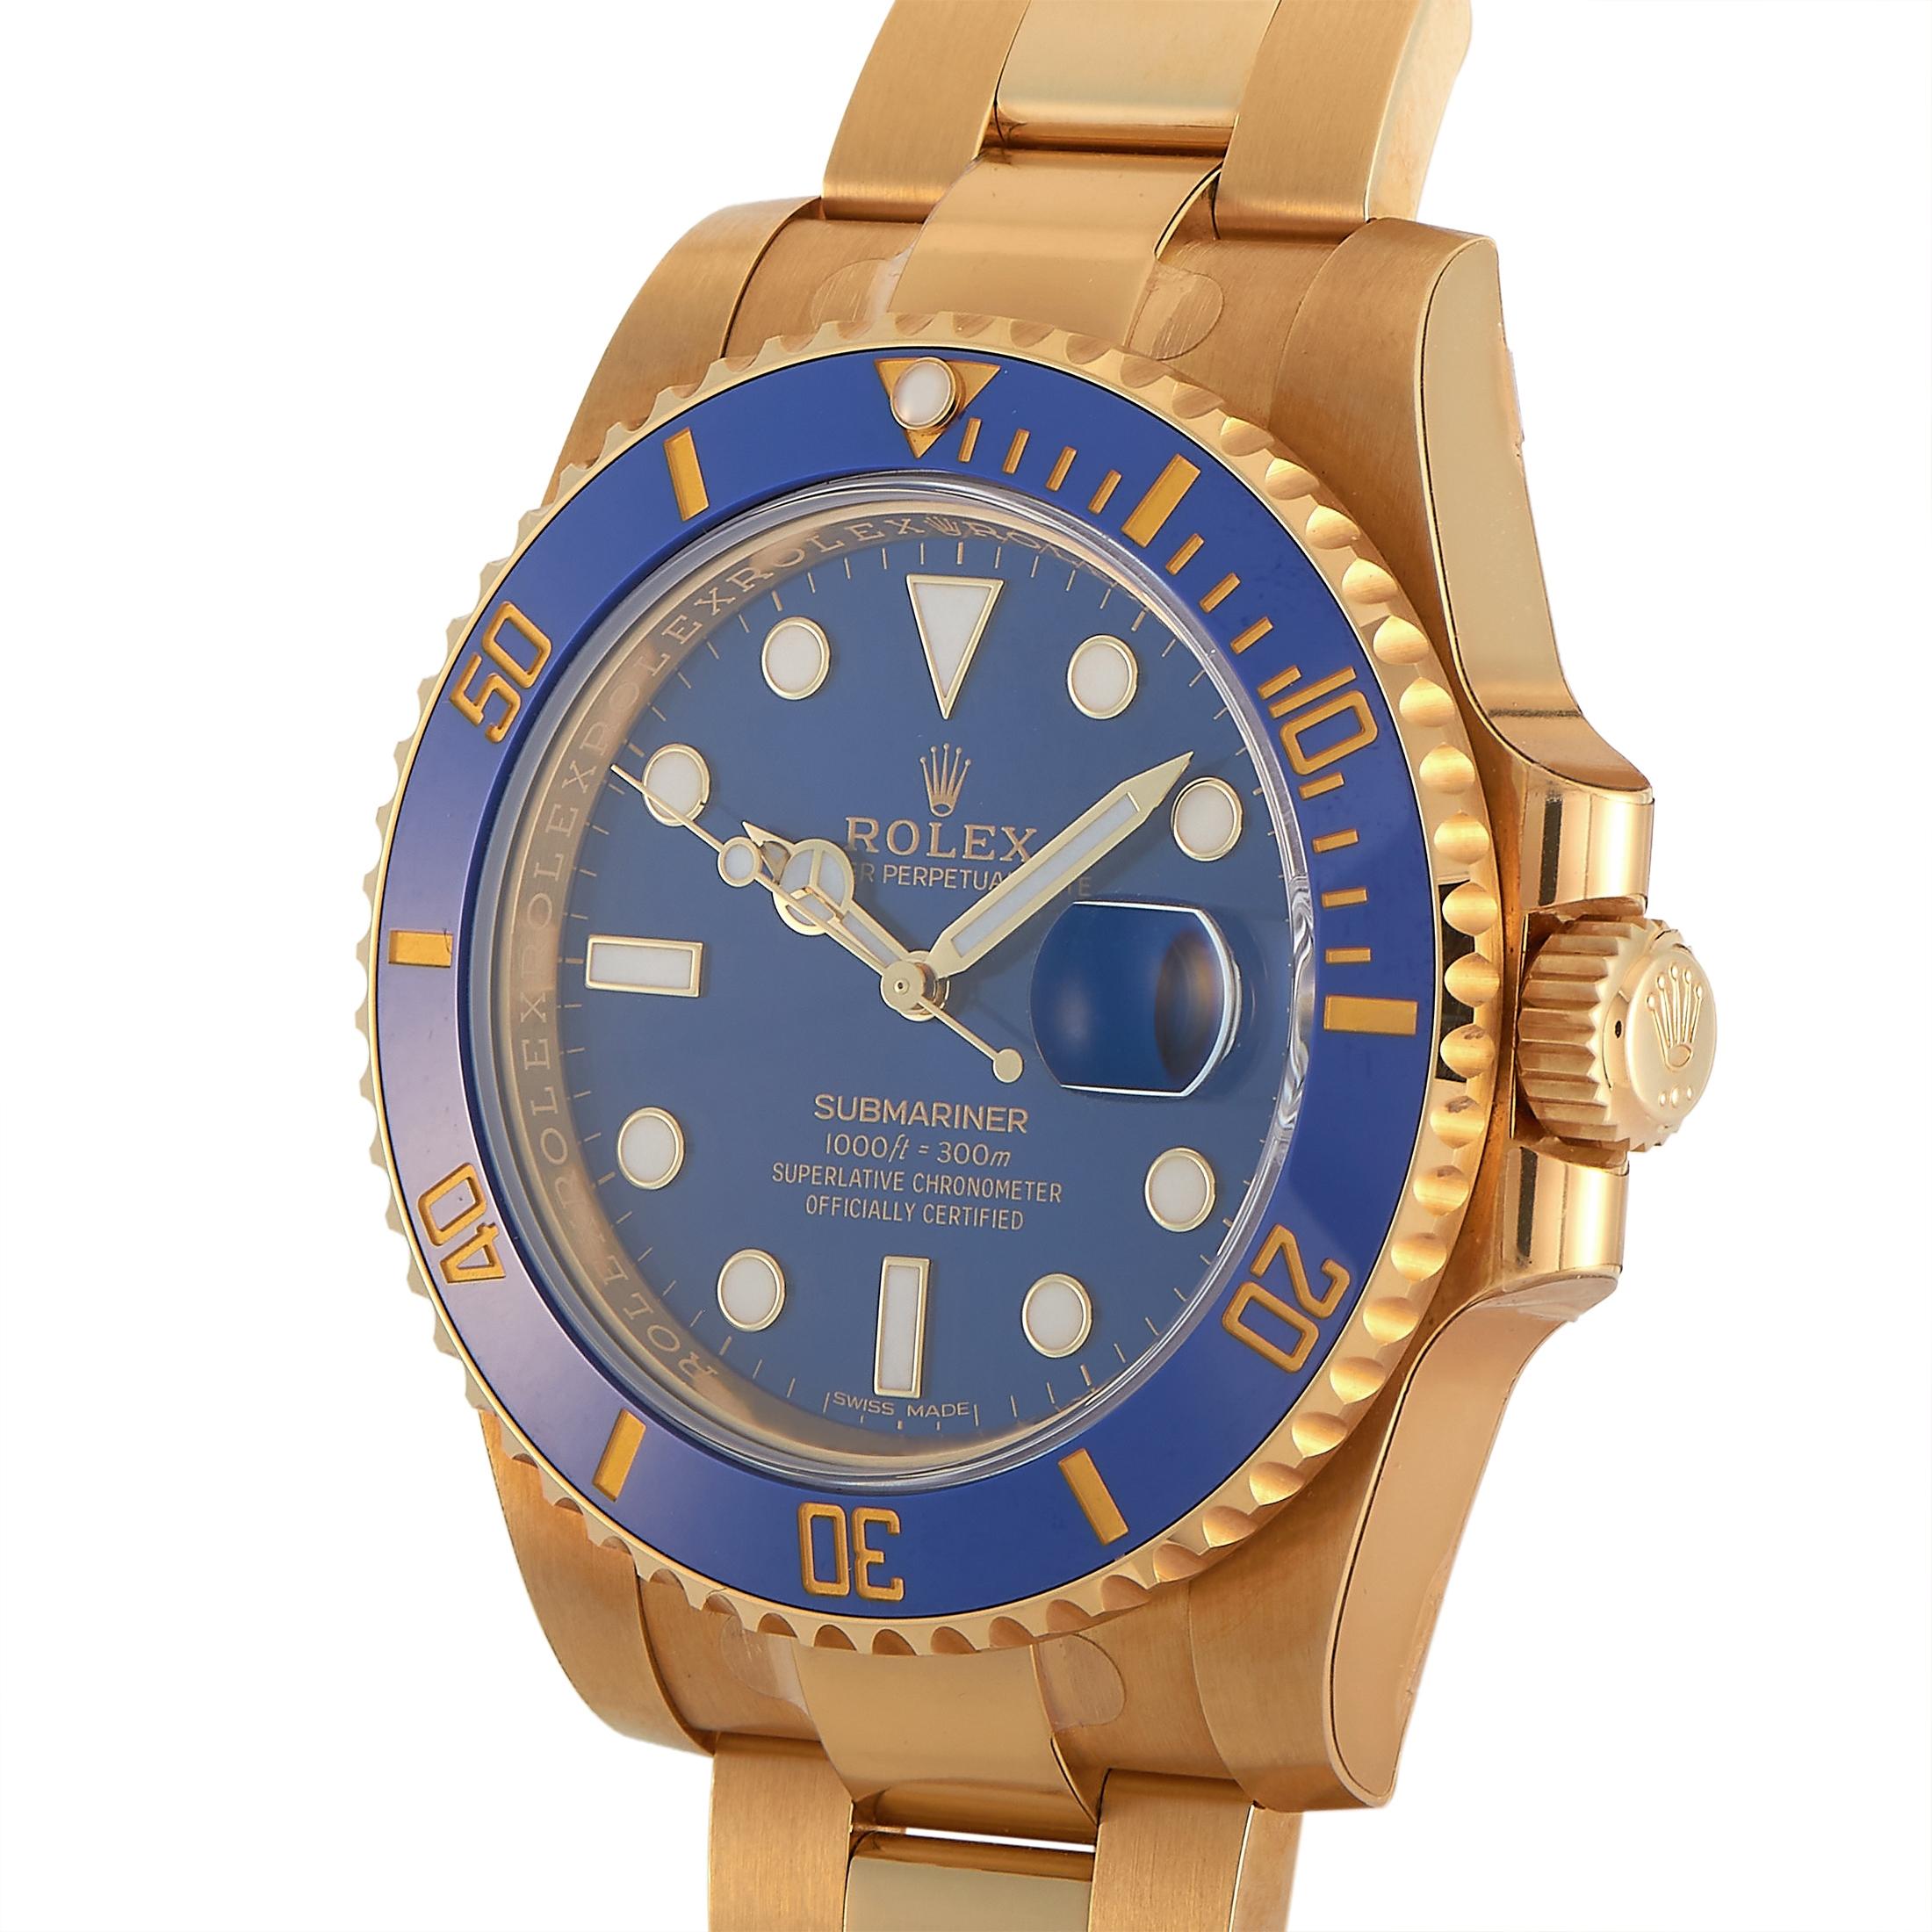 The Rolex Submariner Date, reference number 116618LB, is a member of the superb “Submariner” collection.

The watch comes with a 40 mm 18K yellow gold case that boasts a unidirectional rotating 18K yellow gold bezel with blue Cerachrom insert. The